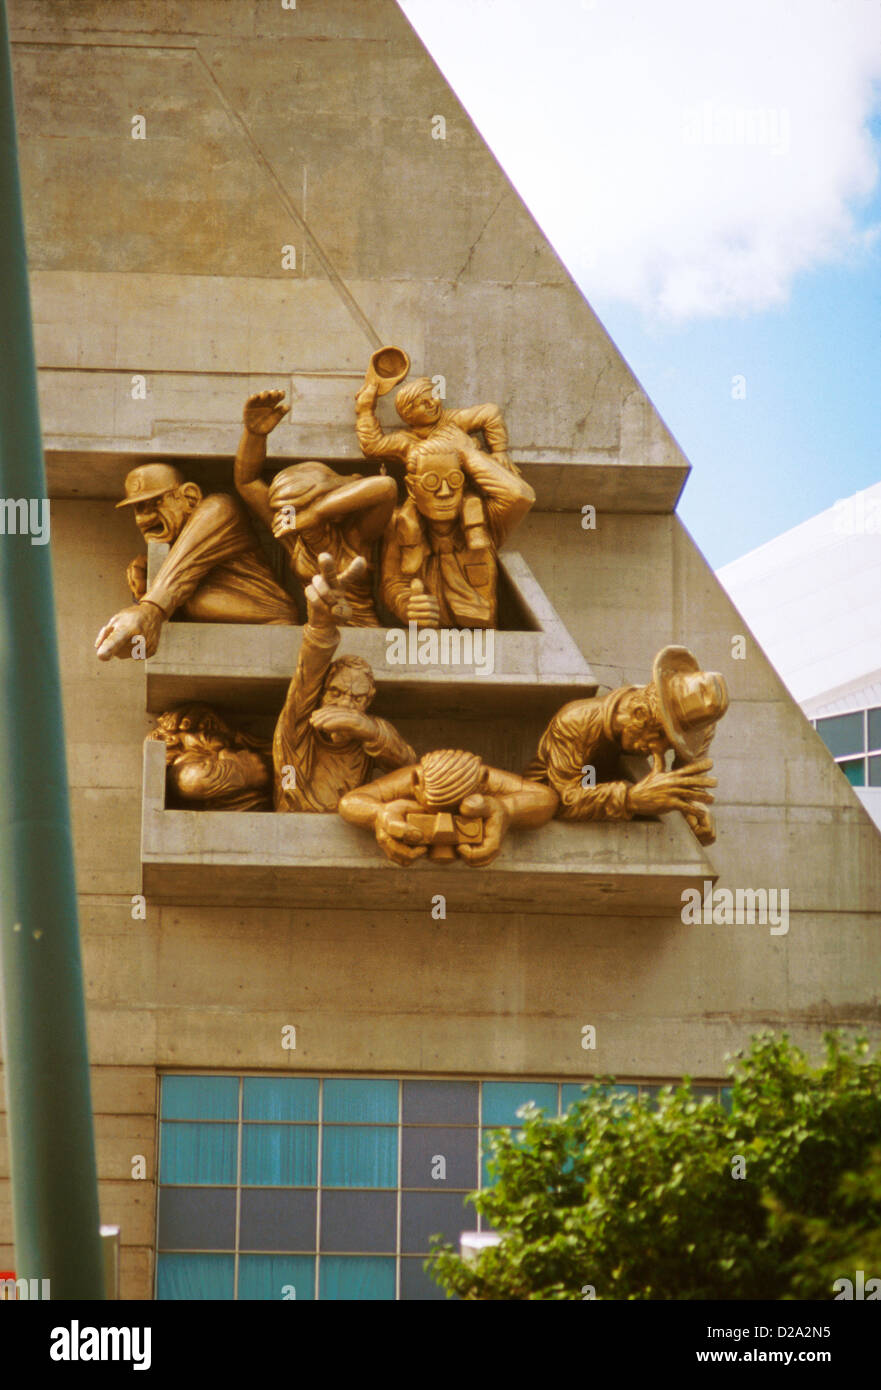 Canada, Ontario, Toronto. Sculpture On Skydome Titled: The Audience. Stock Photo